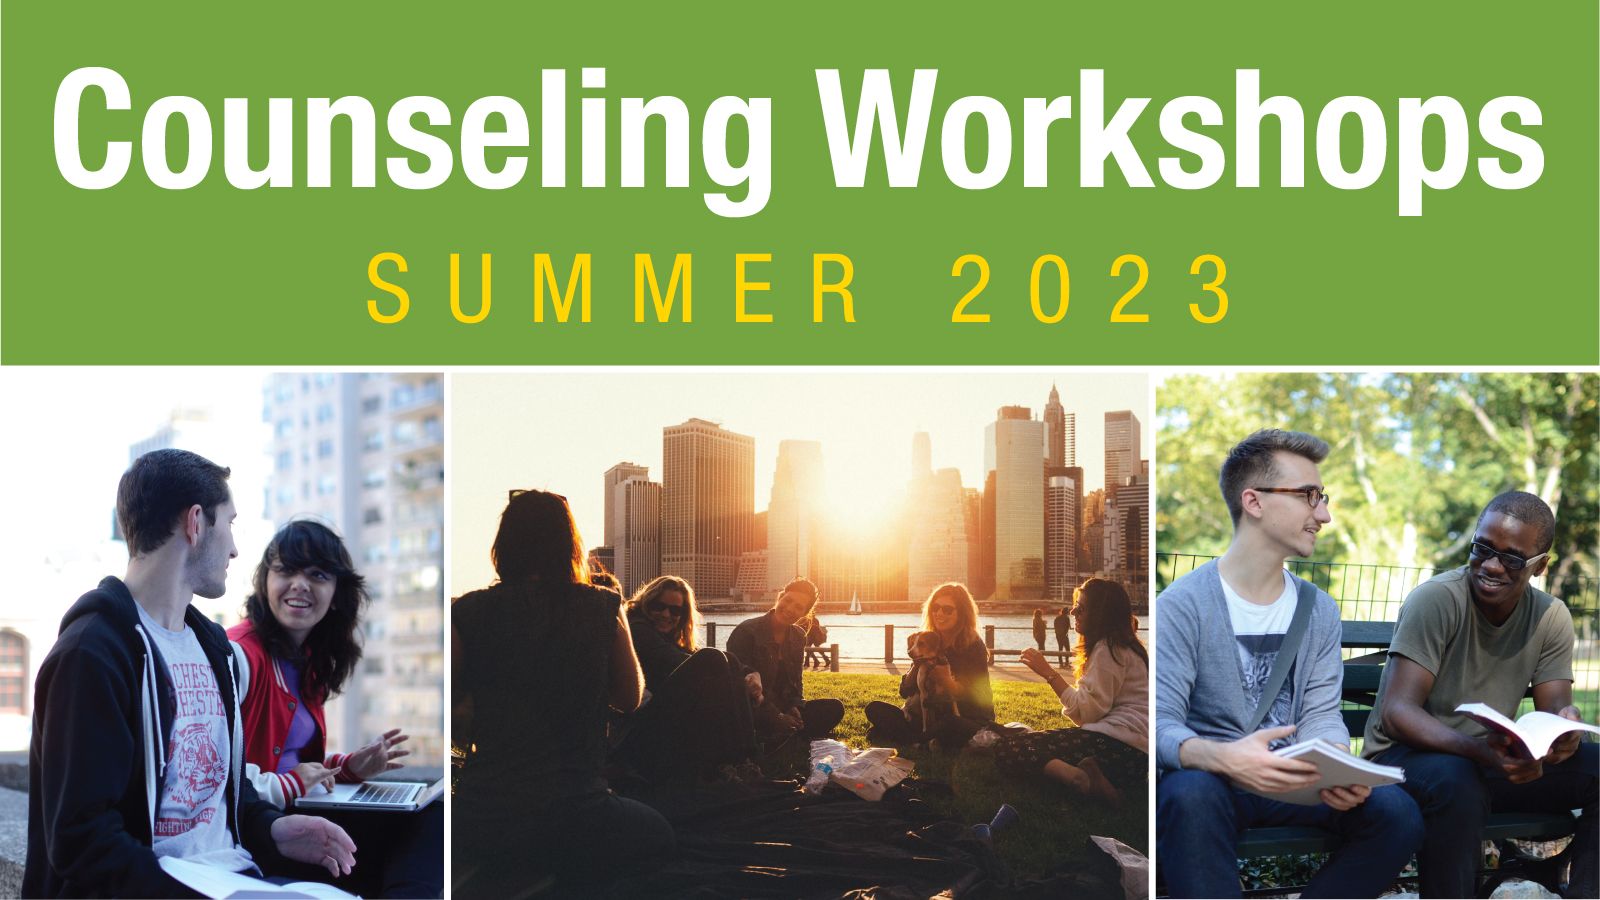 In this image for Counseling Workshops, Summer 2023, students are sitting on the sunlit grass and talking, with lower Manhattan in the background.